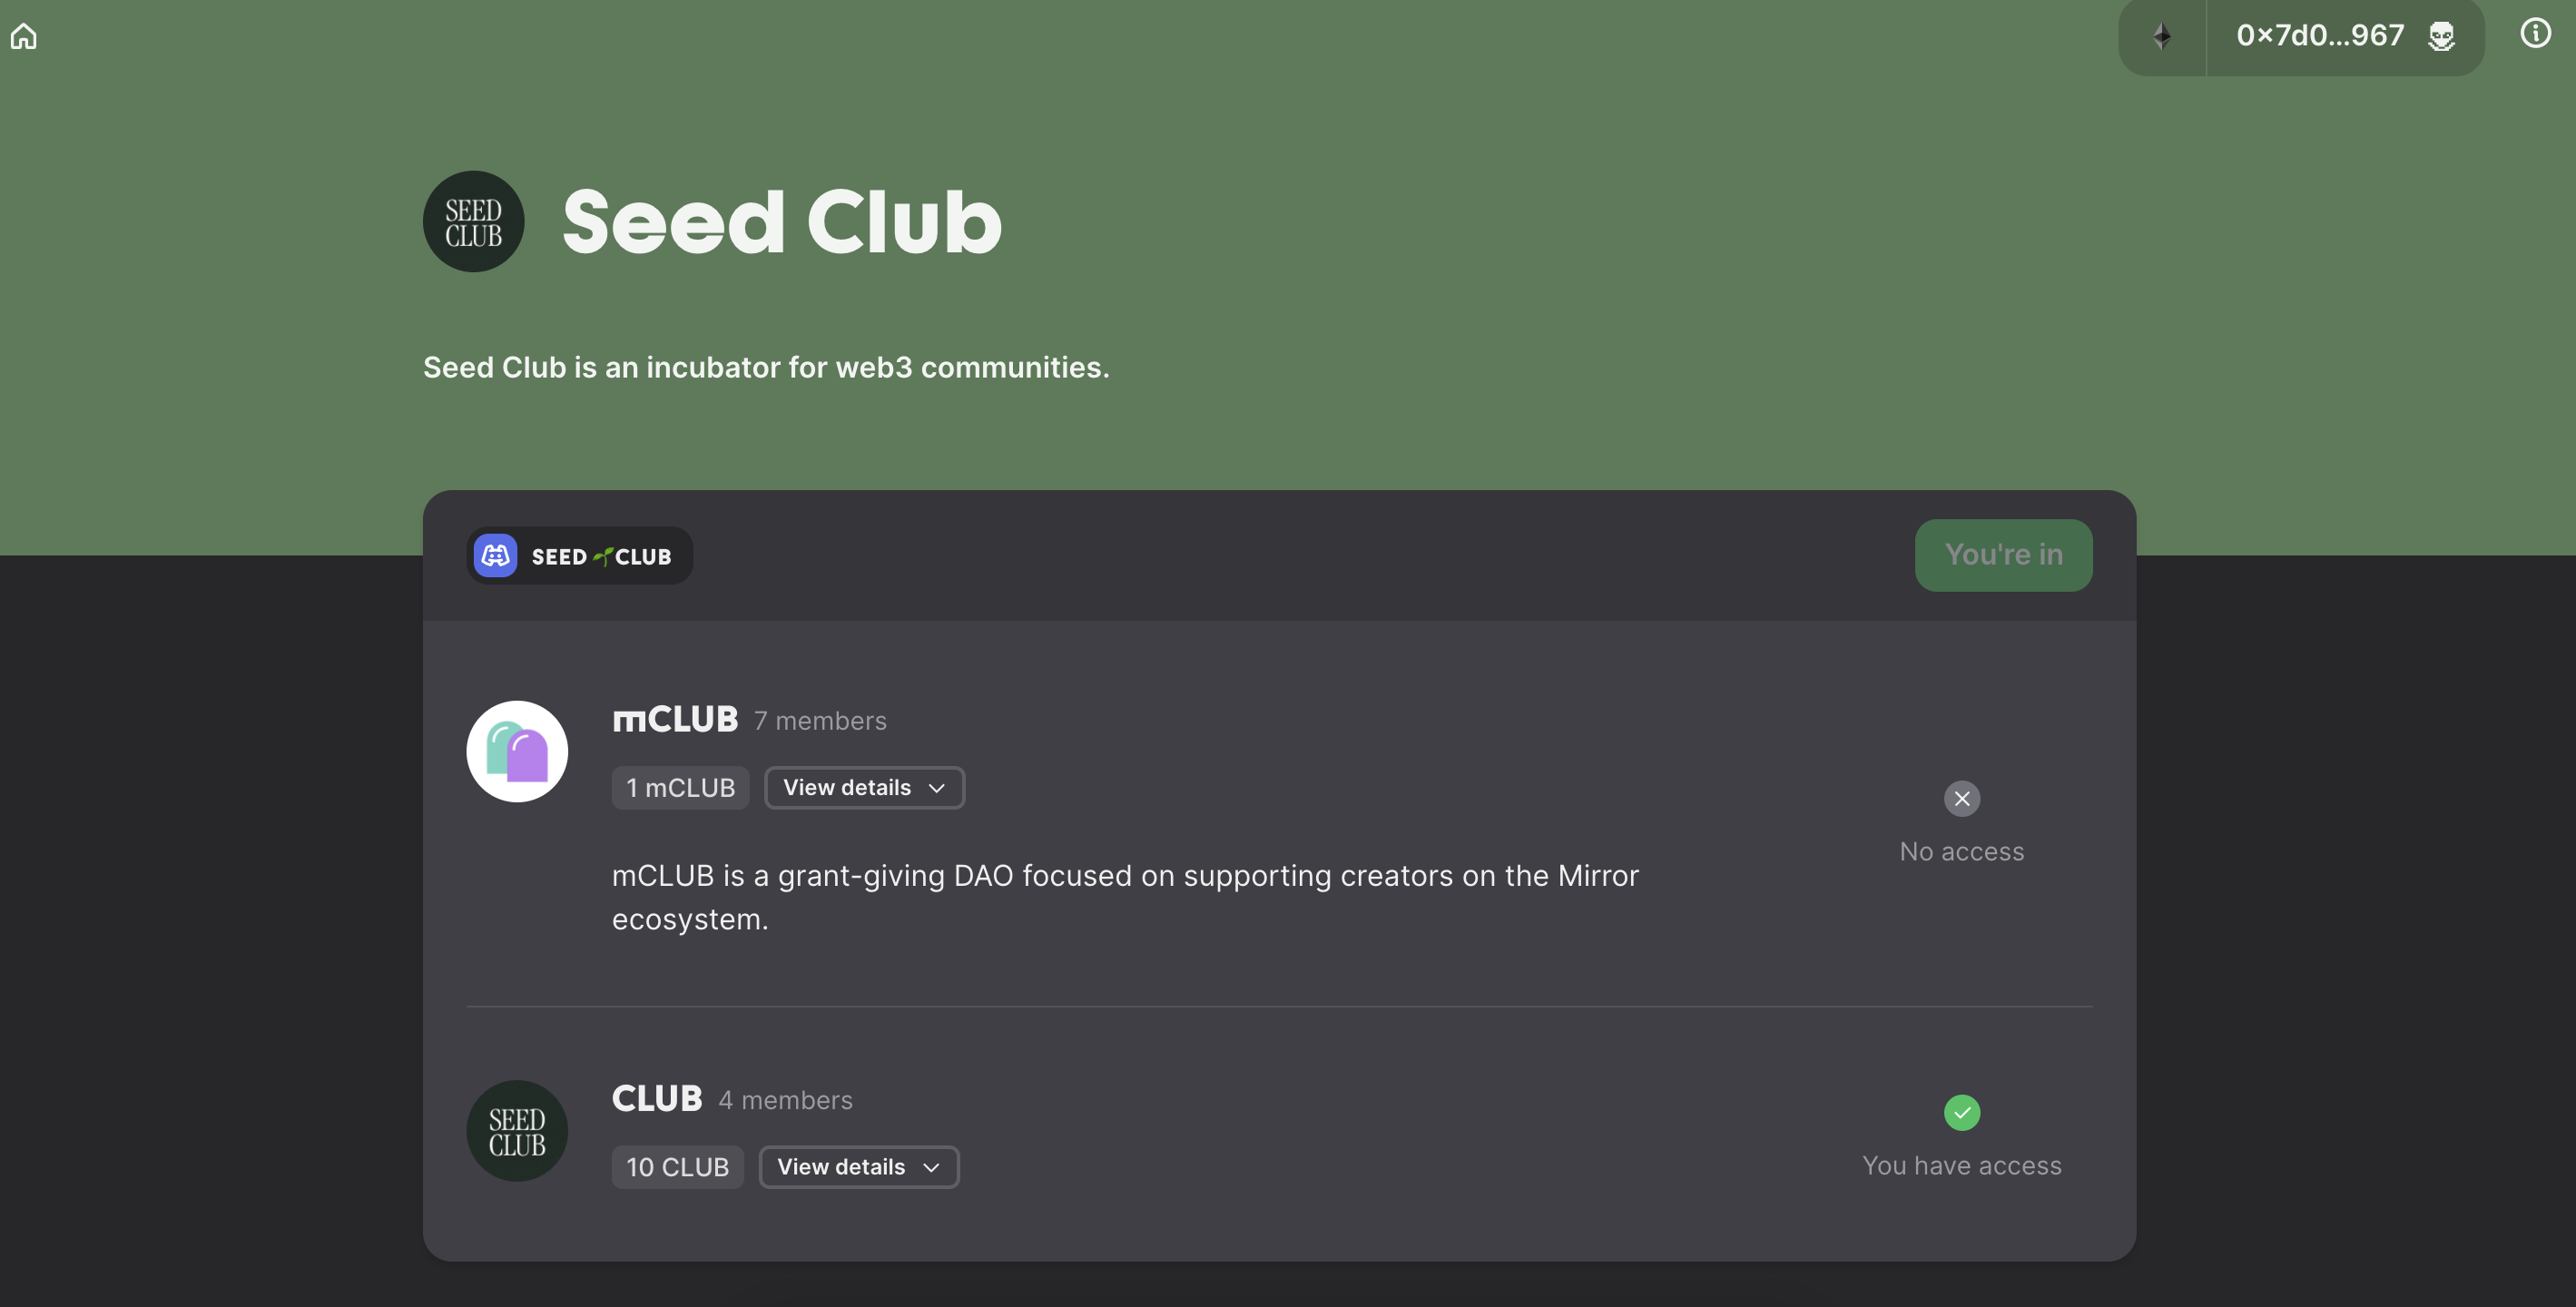 Seed Club - Discord Server for Web3, Venture-capital